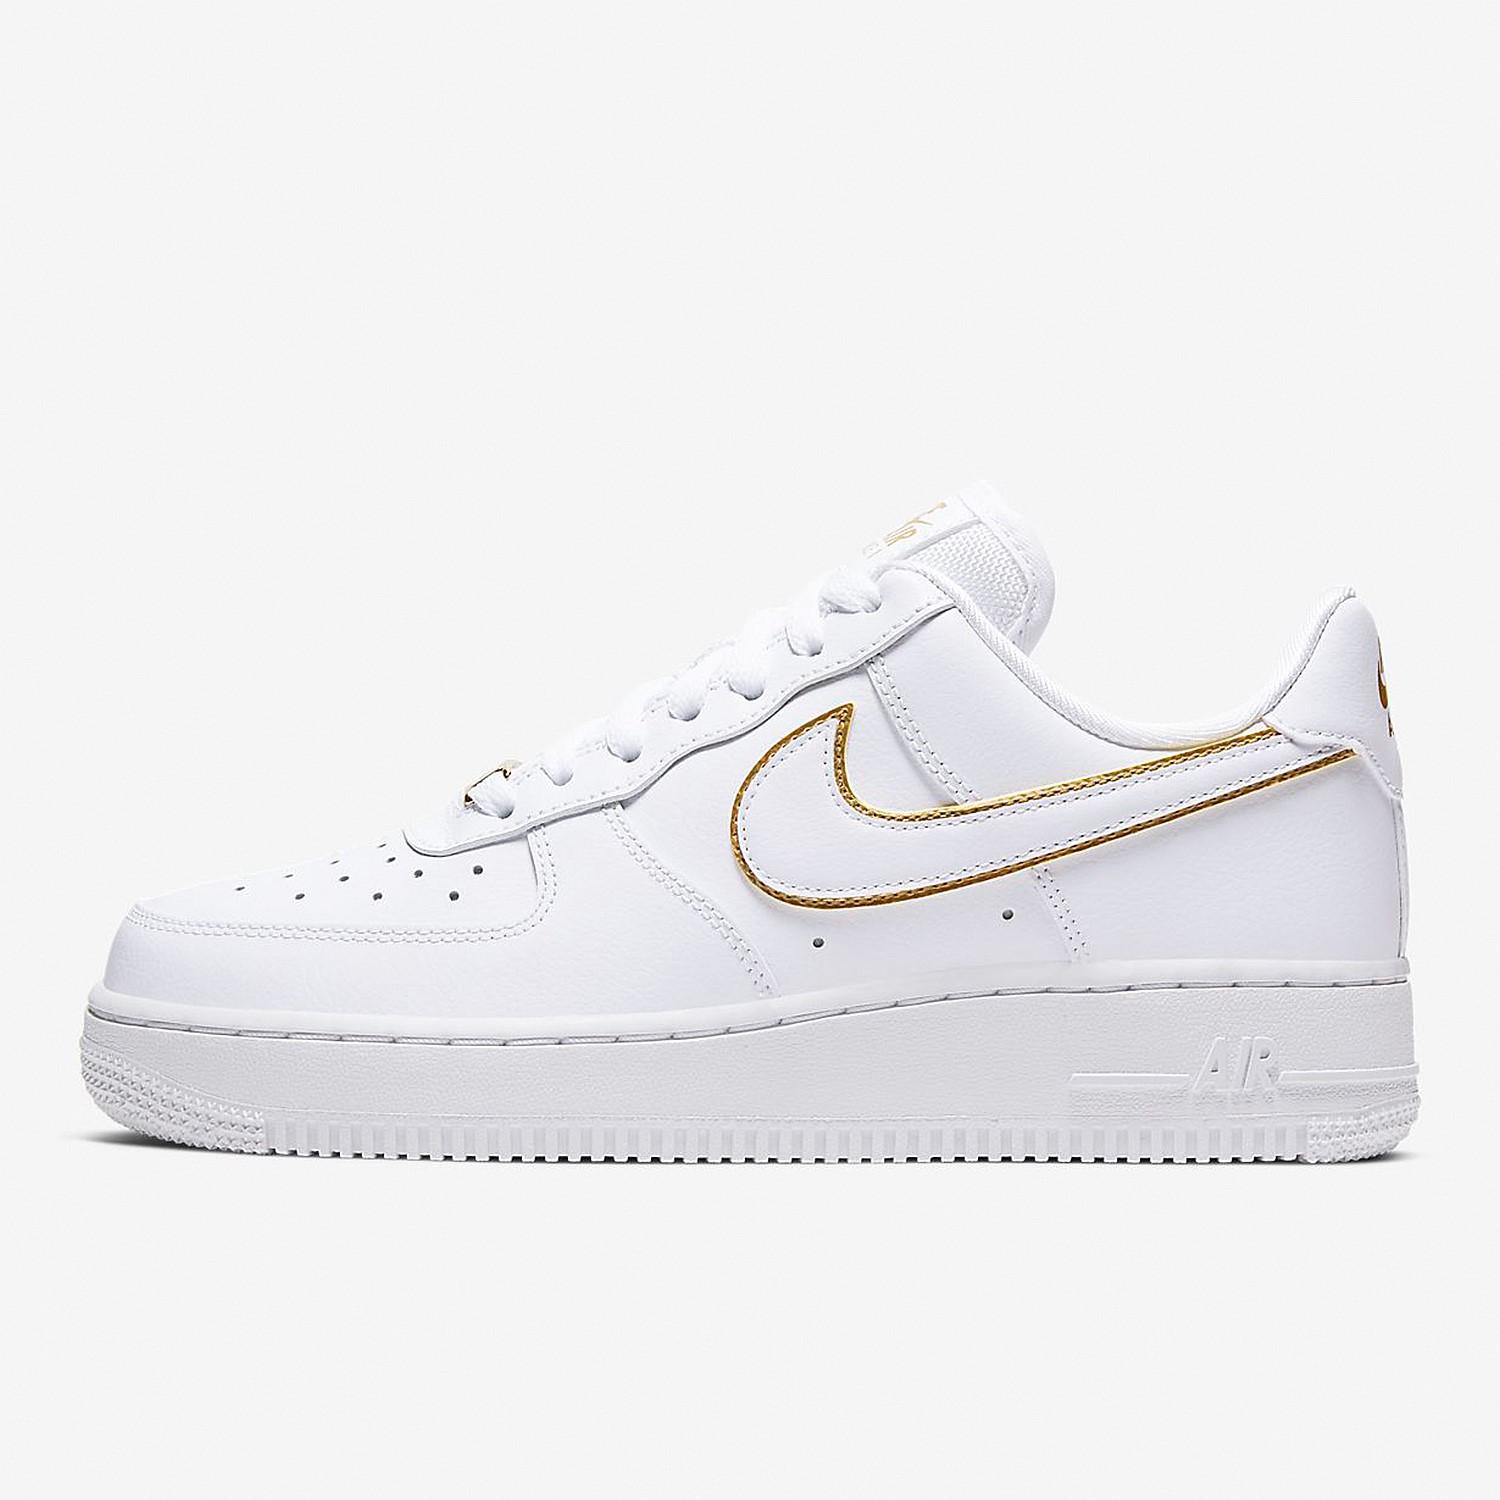 Stirling Sports - Air Force 1 